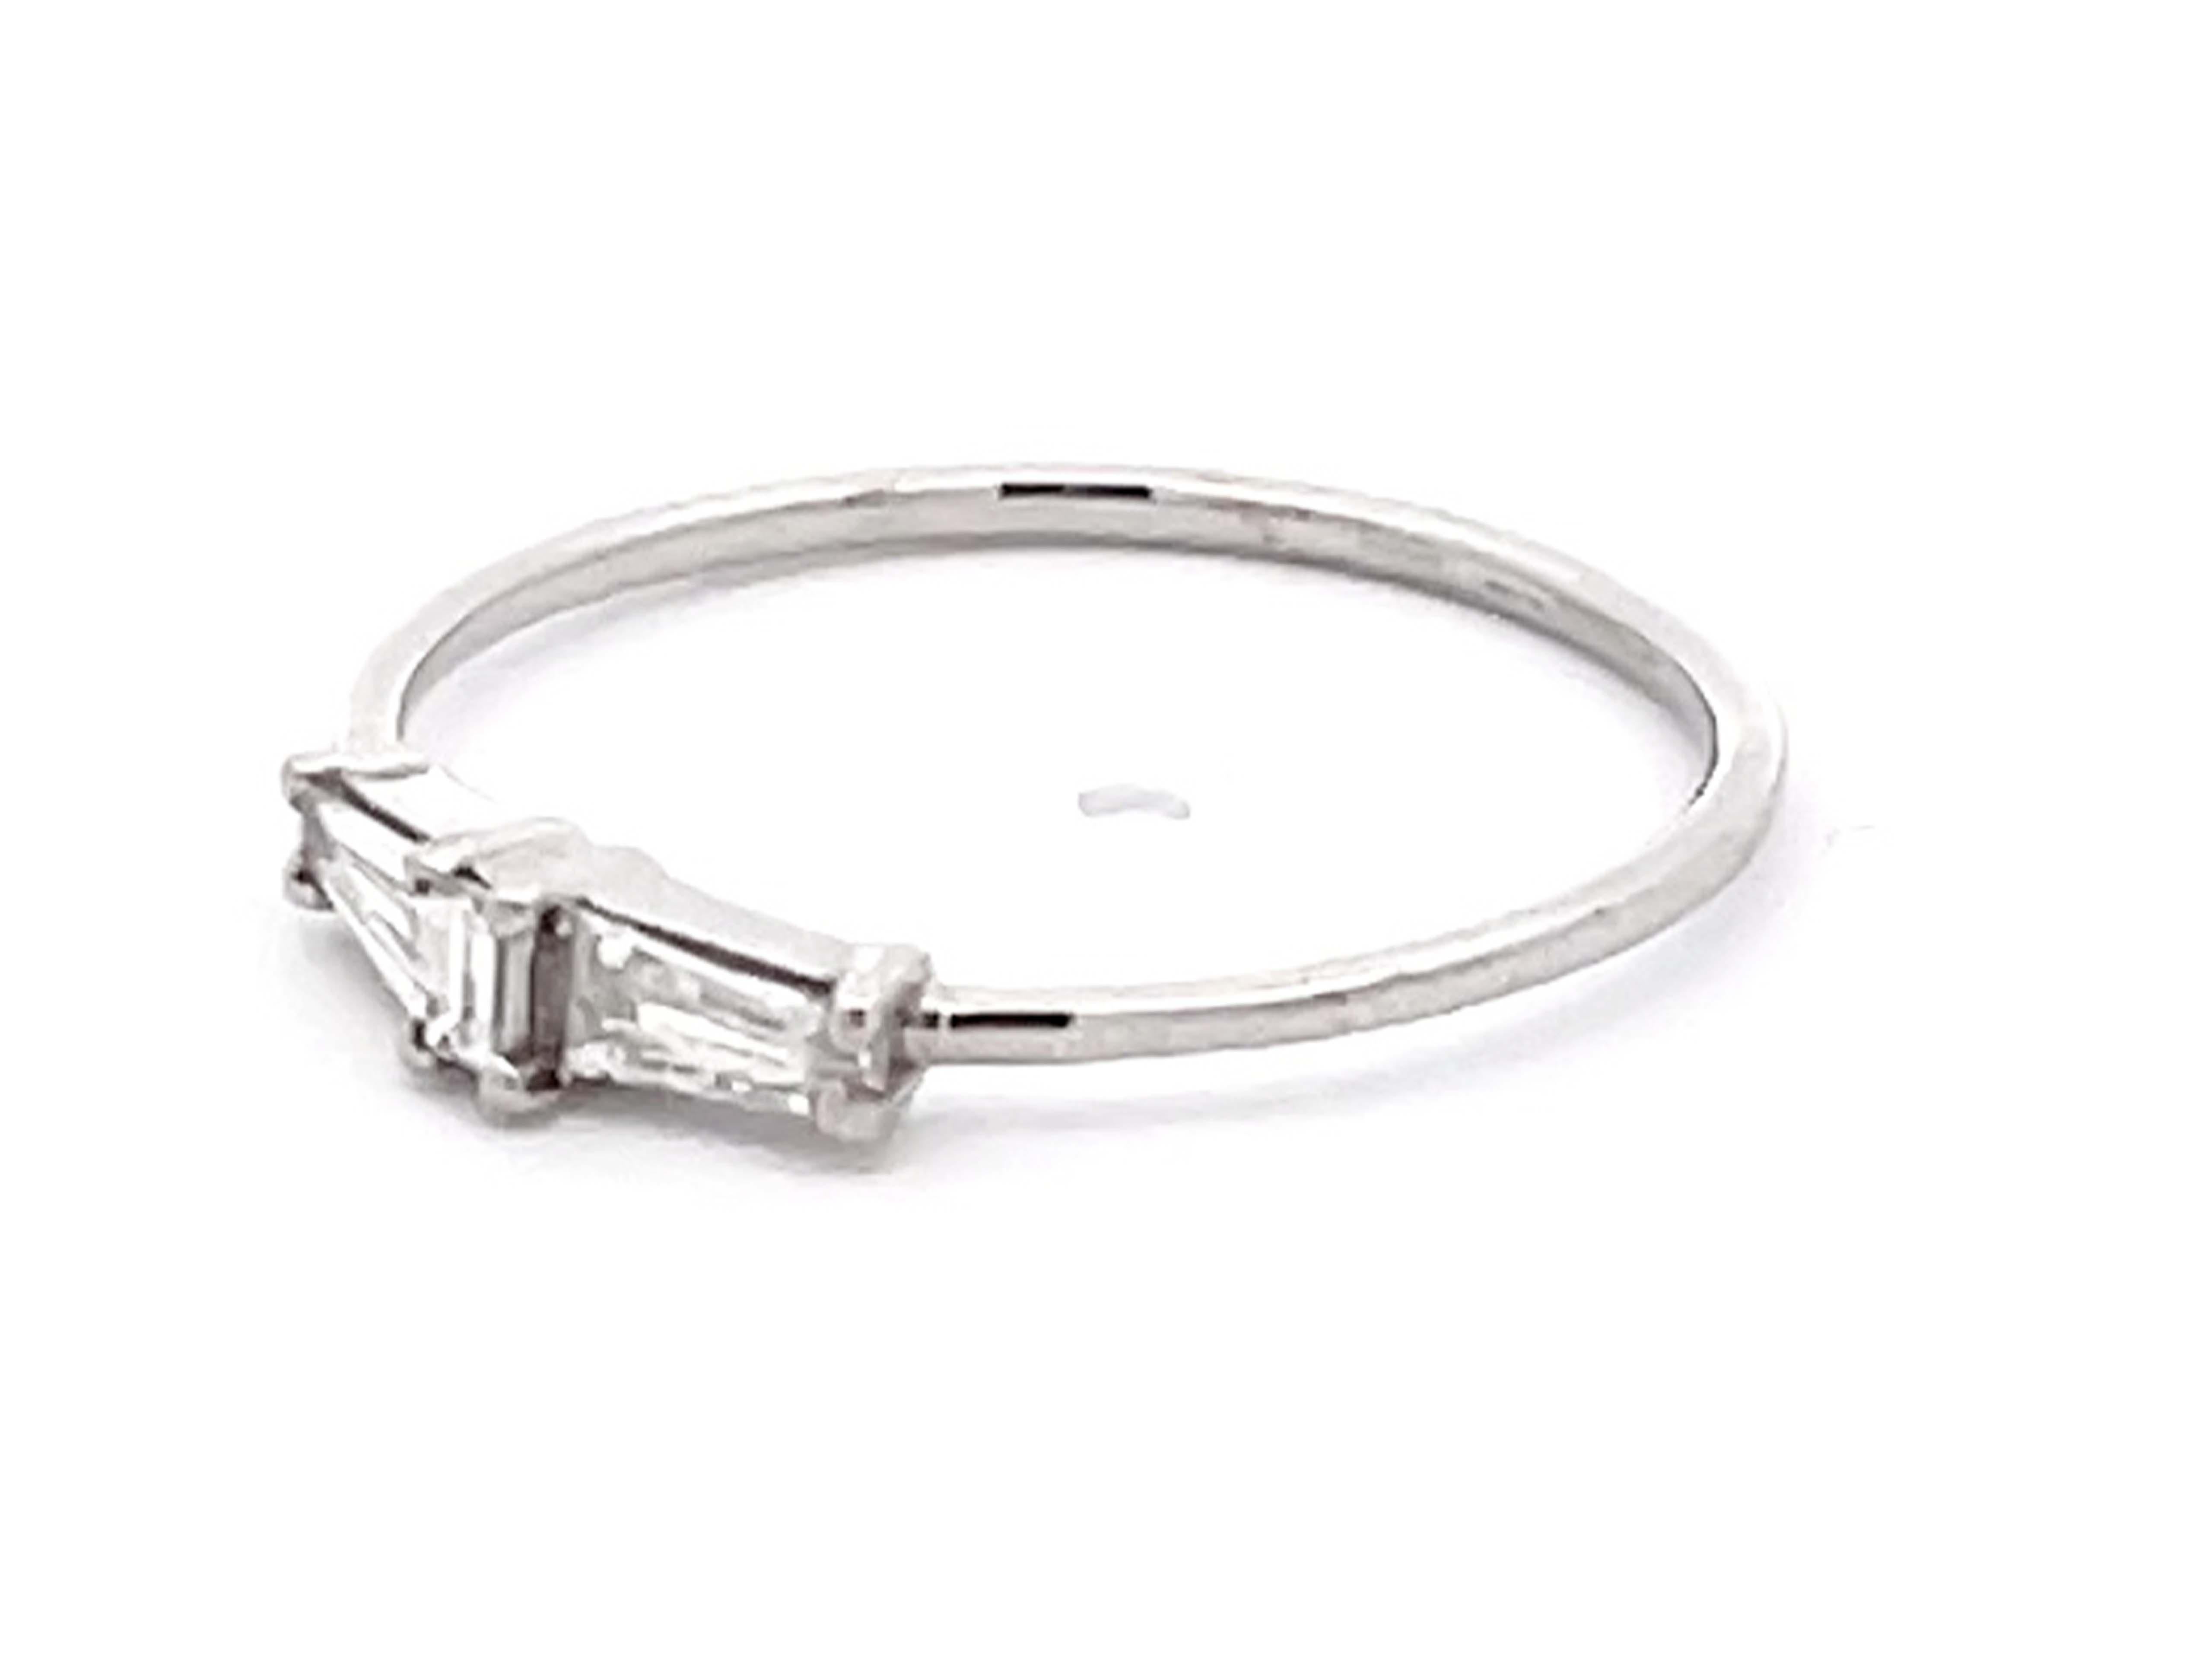 Baguette Cut Three Baguette Diamond Thin Band Ring in 14k White Gold